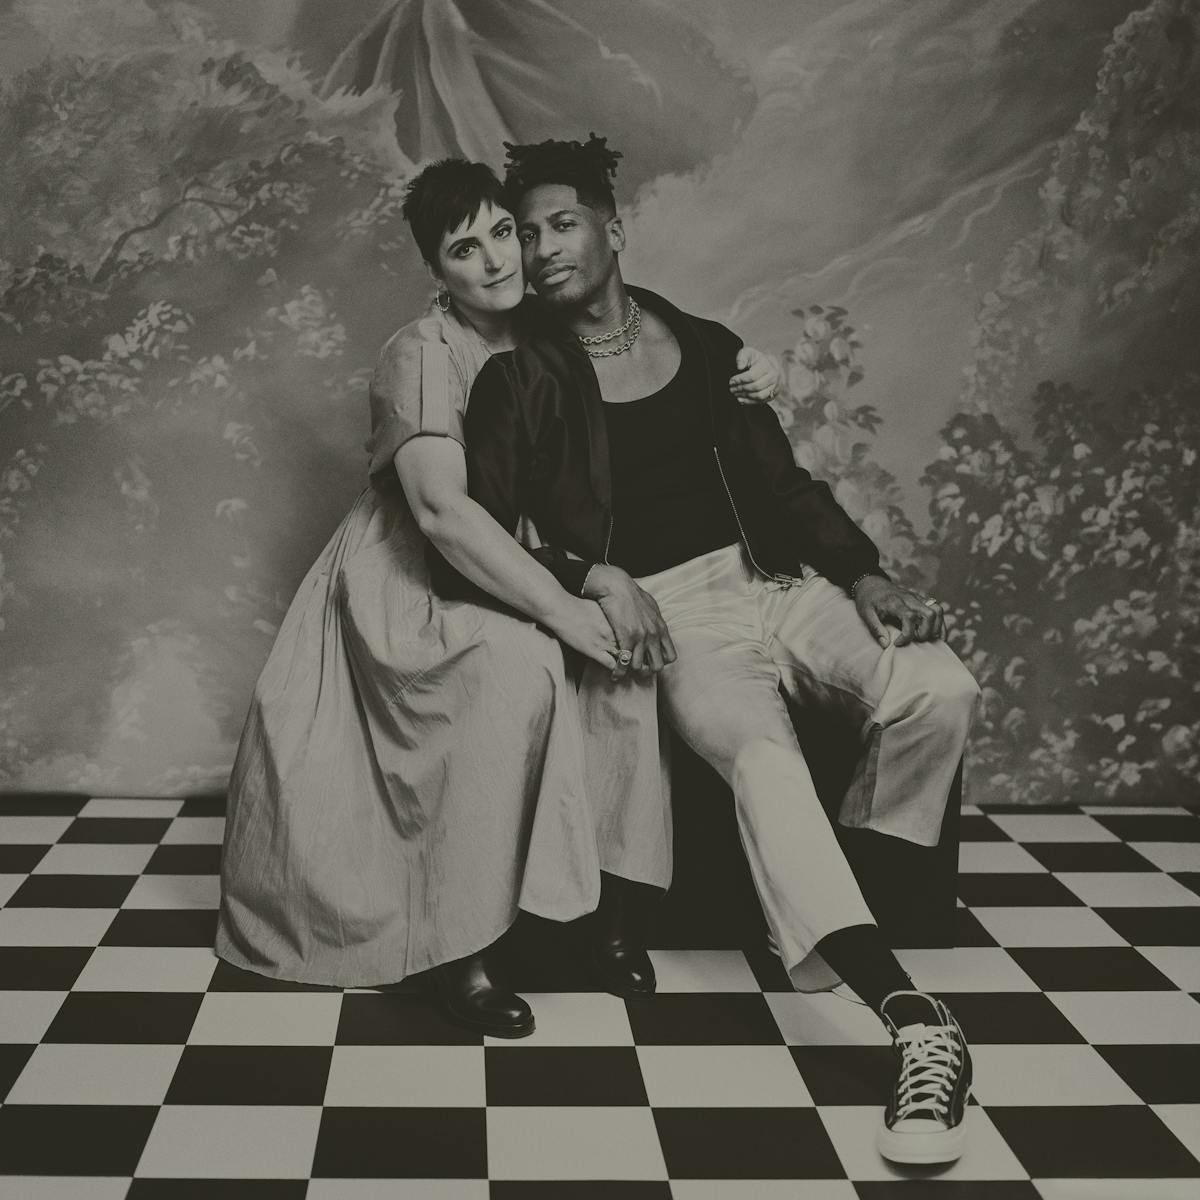 Suleika Jaouad and Jon Batiste smile in a black-and-white picture sitting on a black-and-white checkered floor.